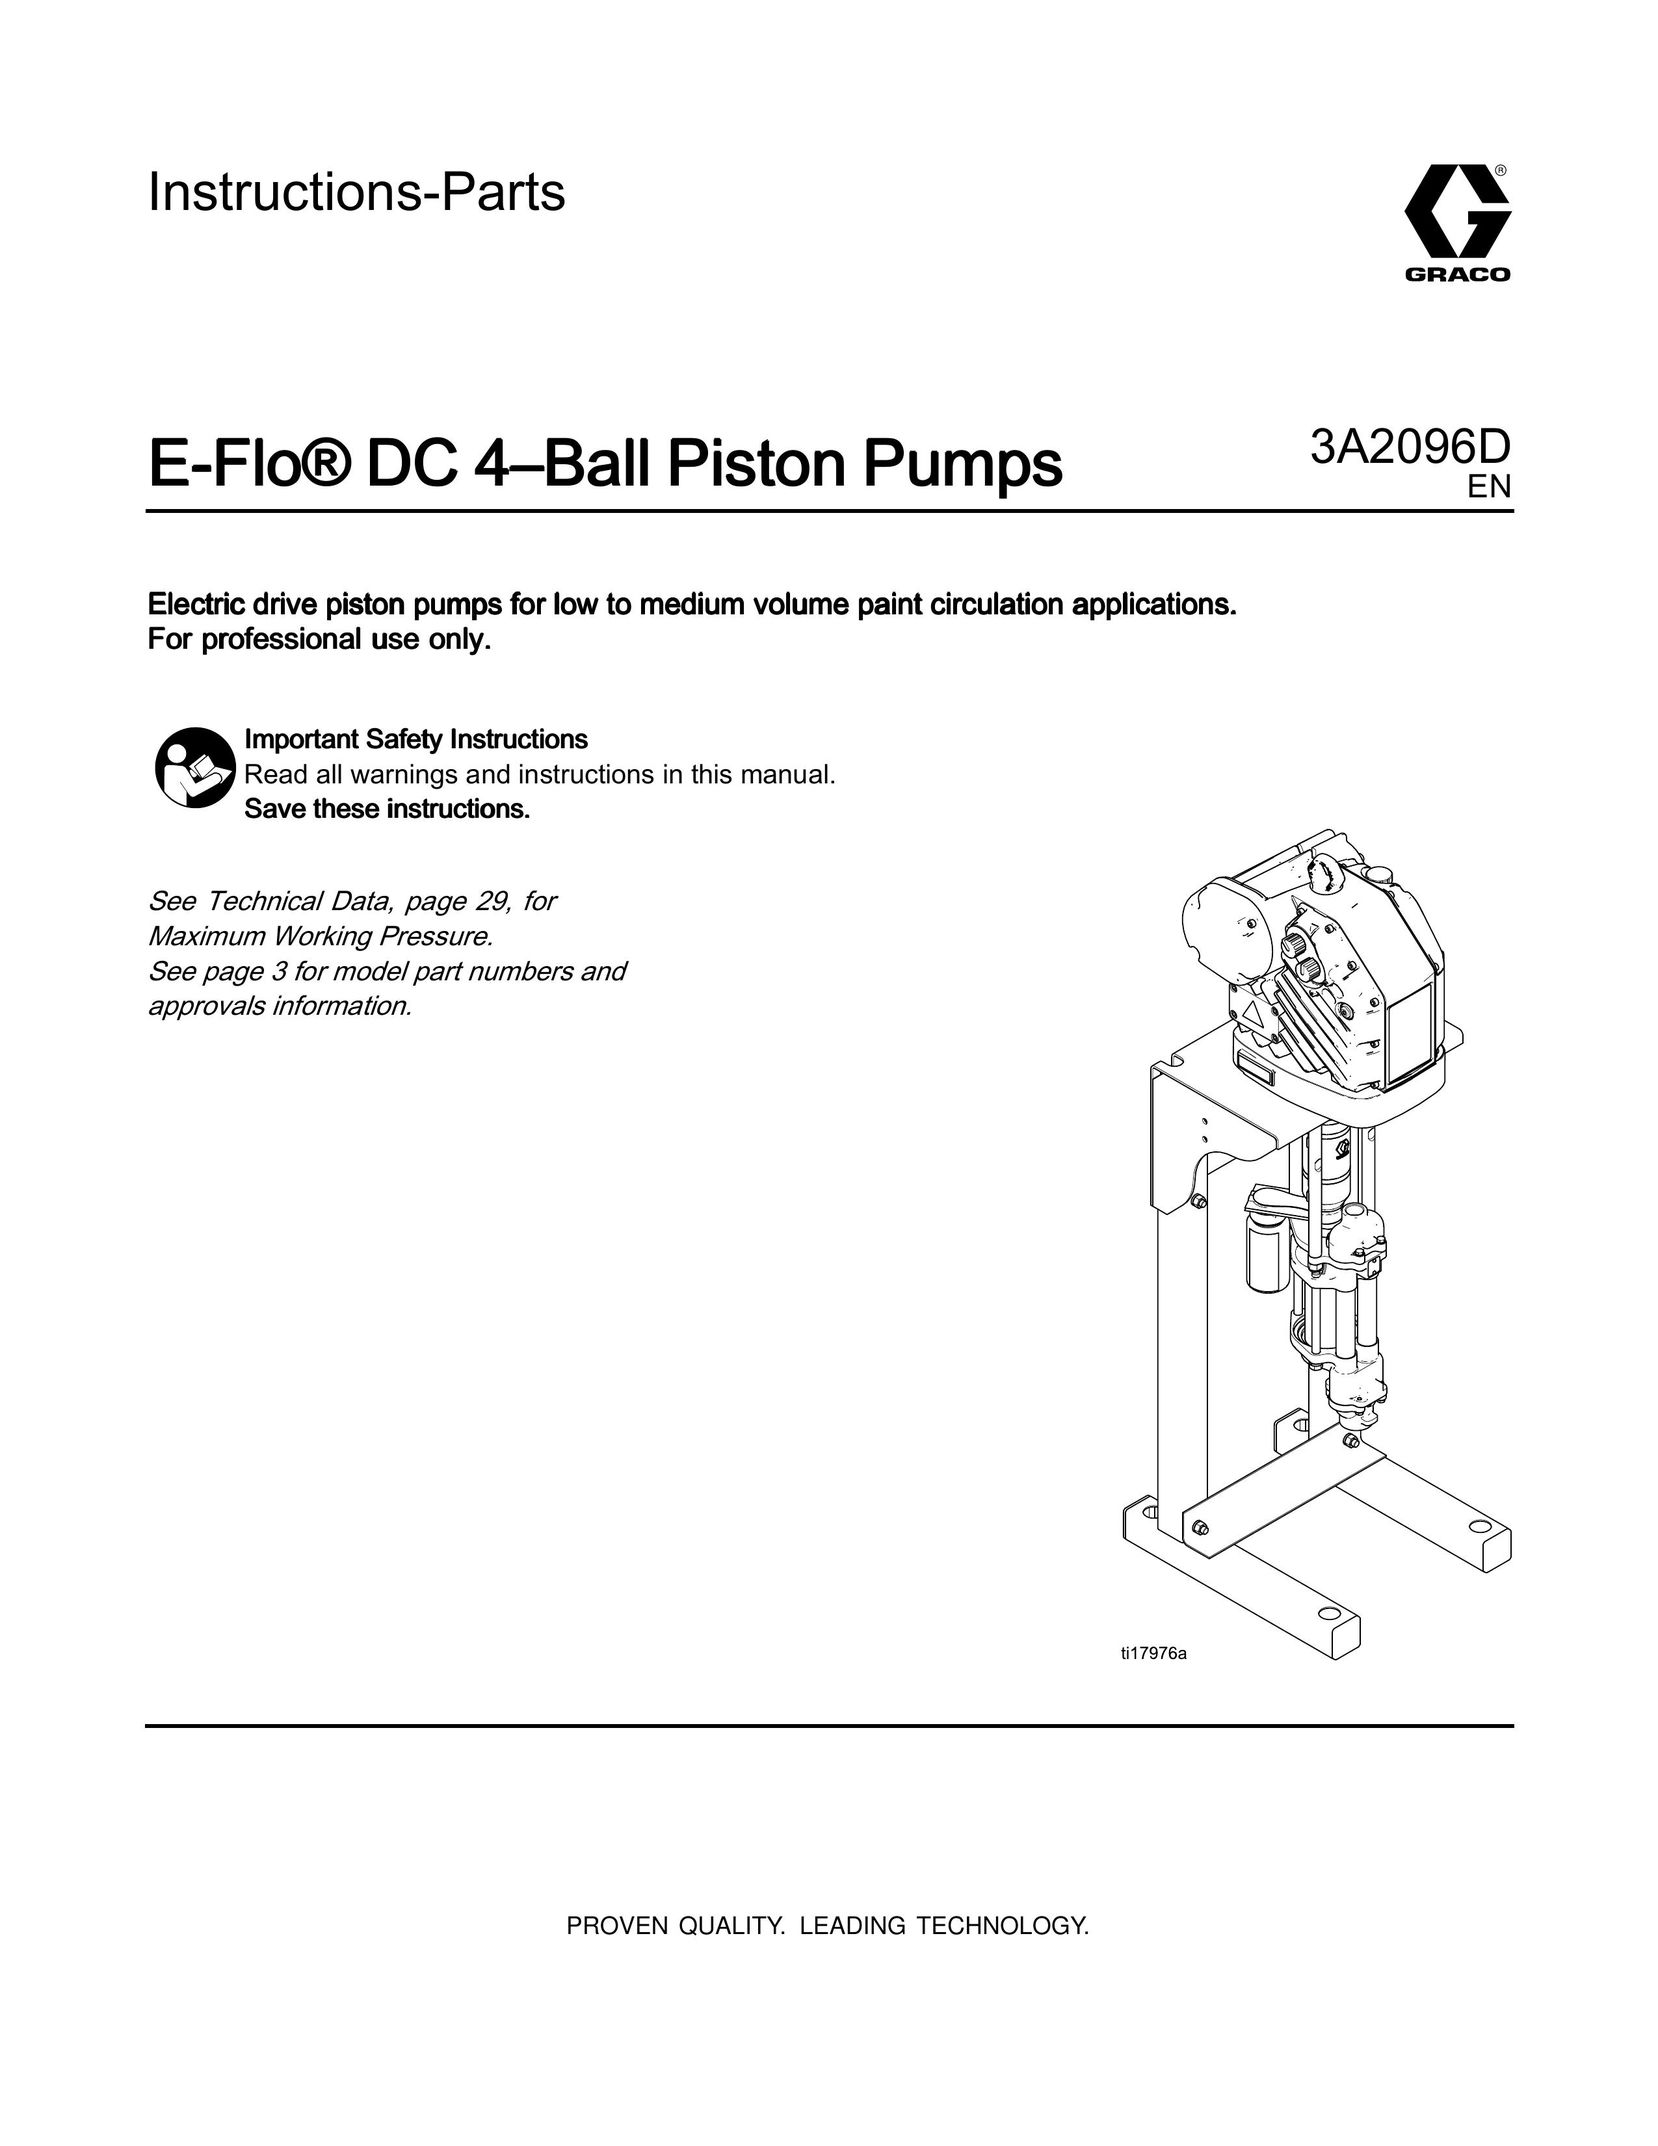 Graco 3A2096D Fitness Equipment User Manual (Page 1)